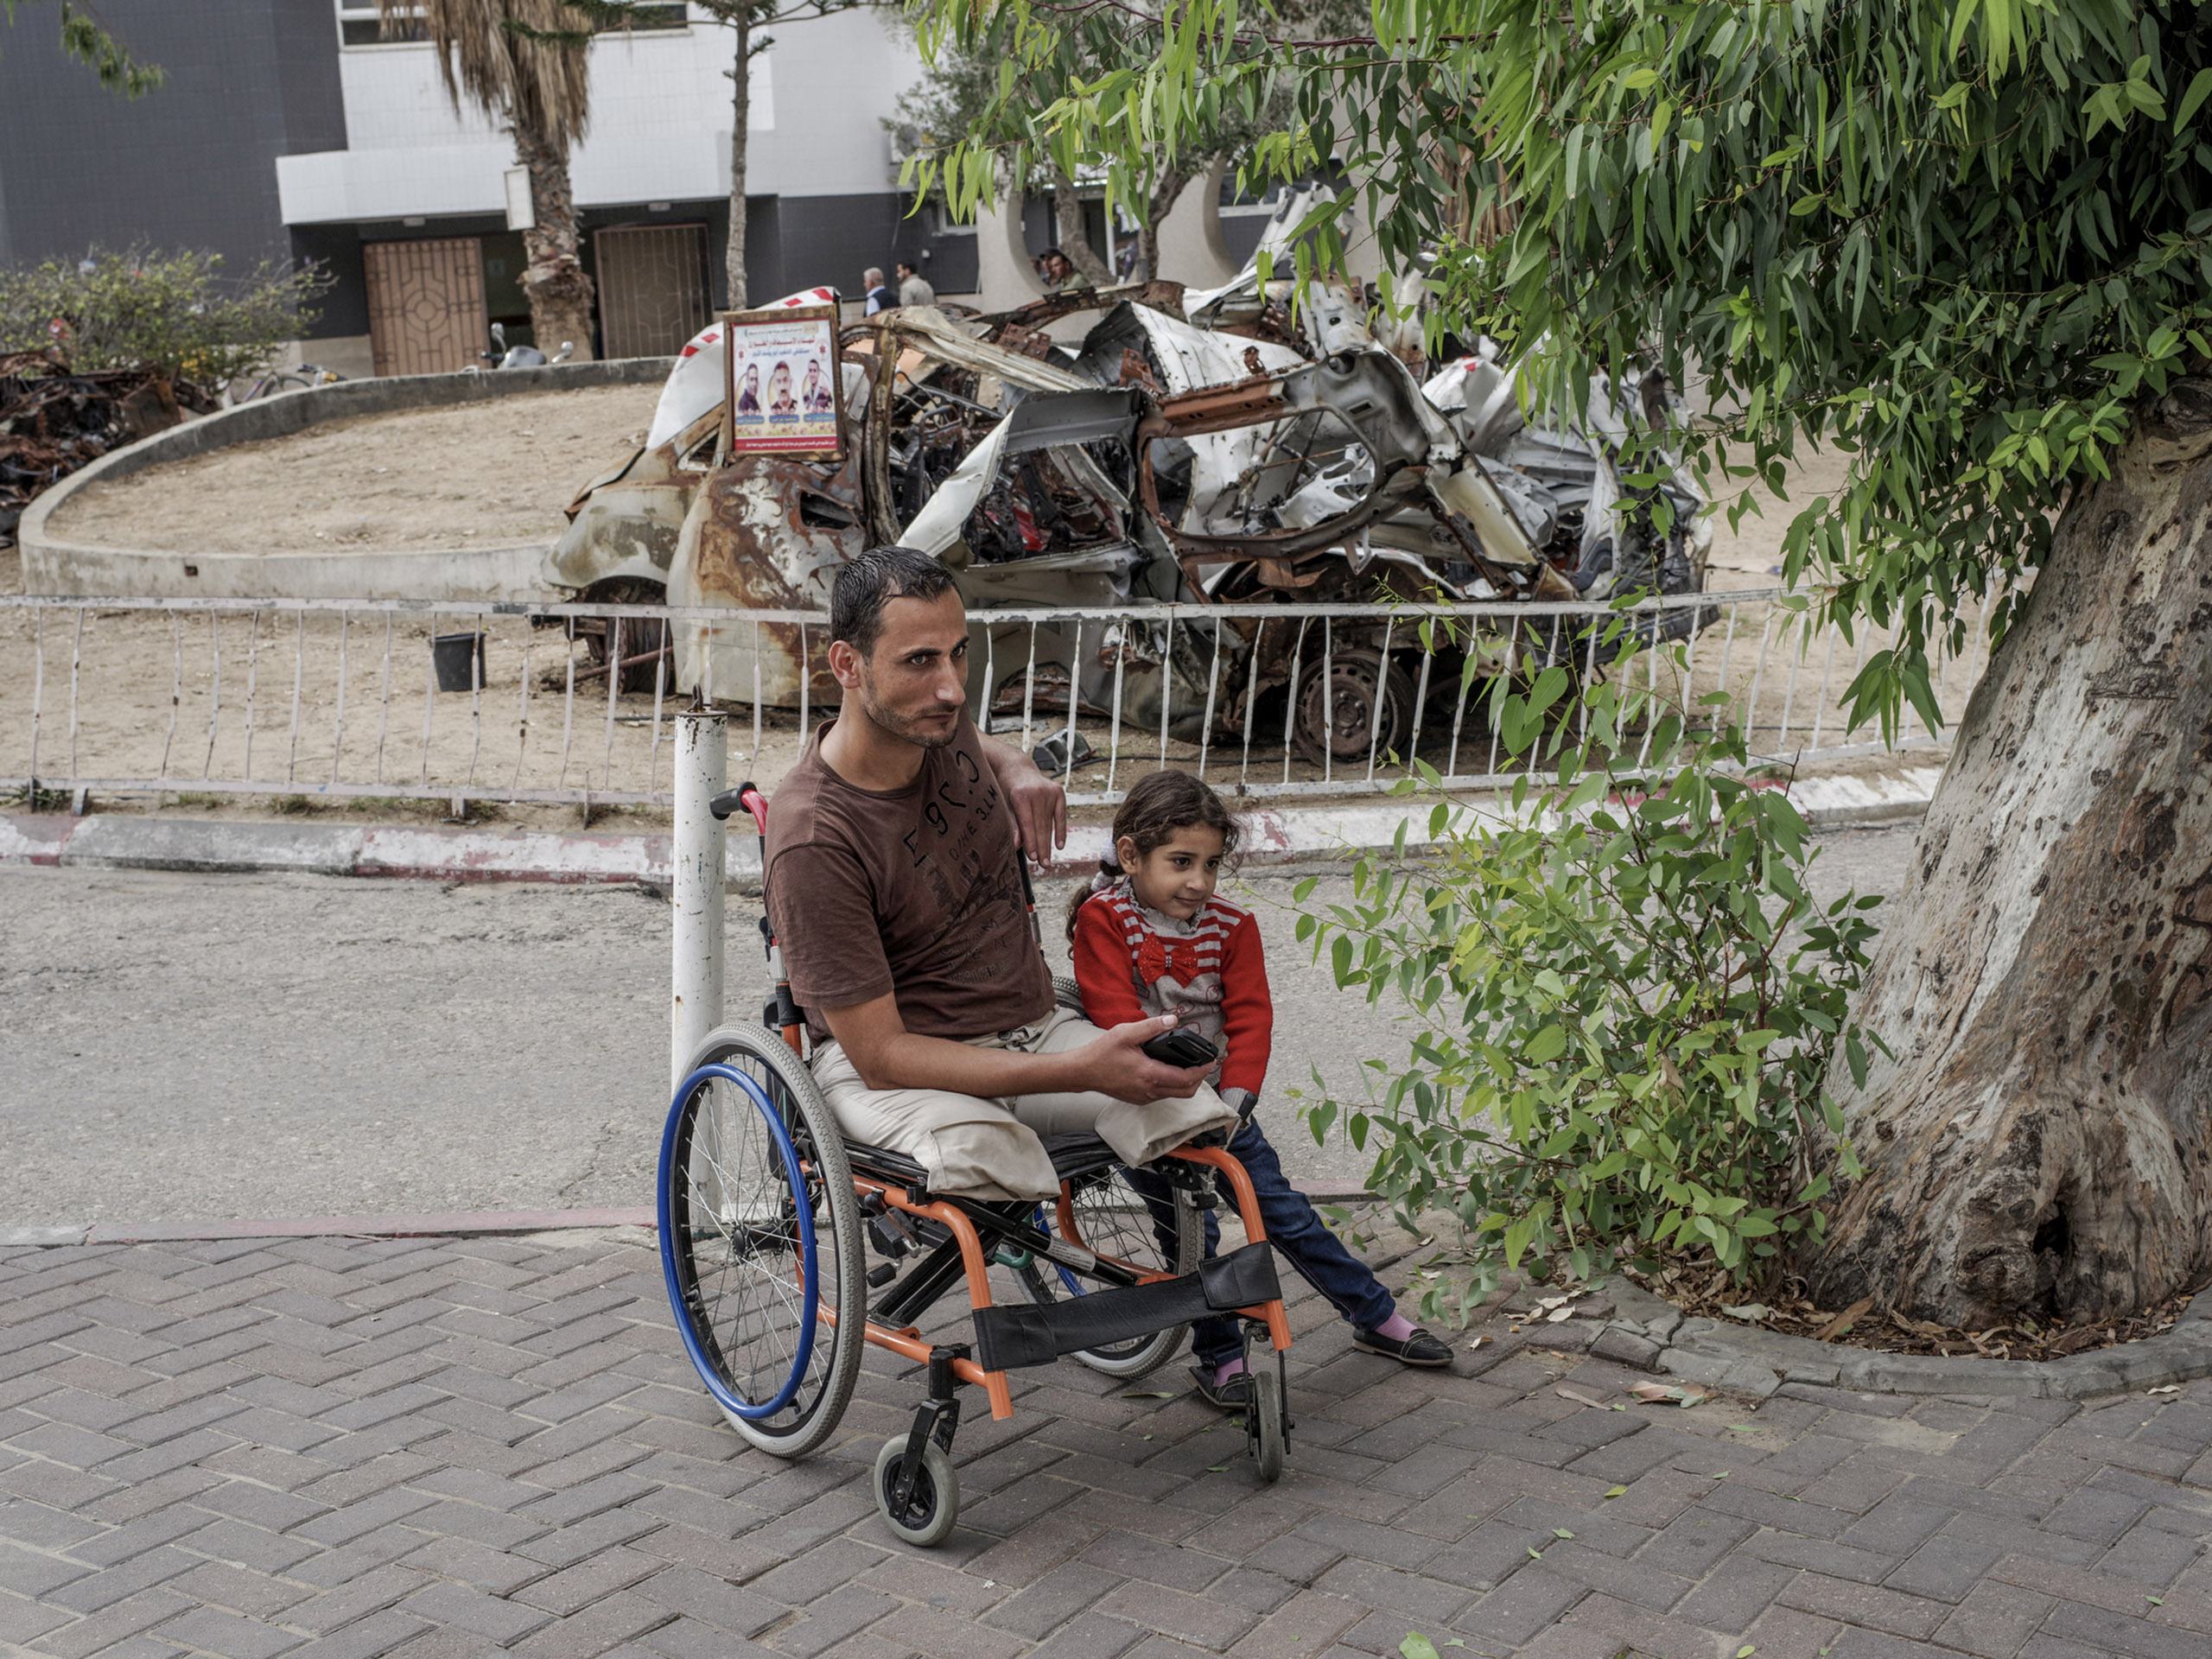 Achmed Hassan and his daughter. Hassan lost both his legs in 2008 and is still in recovery.  The destroyed vehicle in the background is an ambulance destroyed in during Operation Protective Edge.